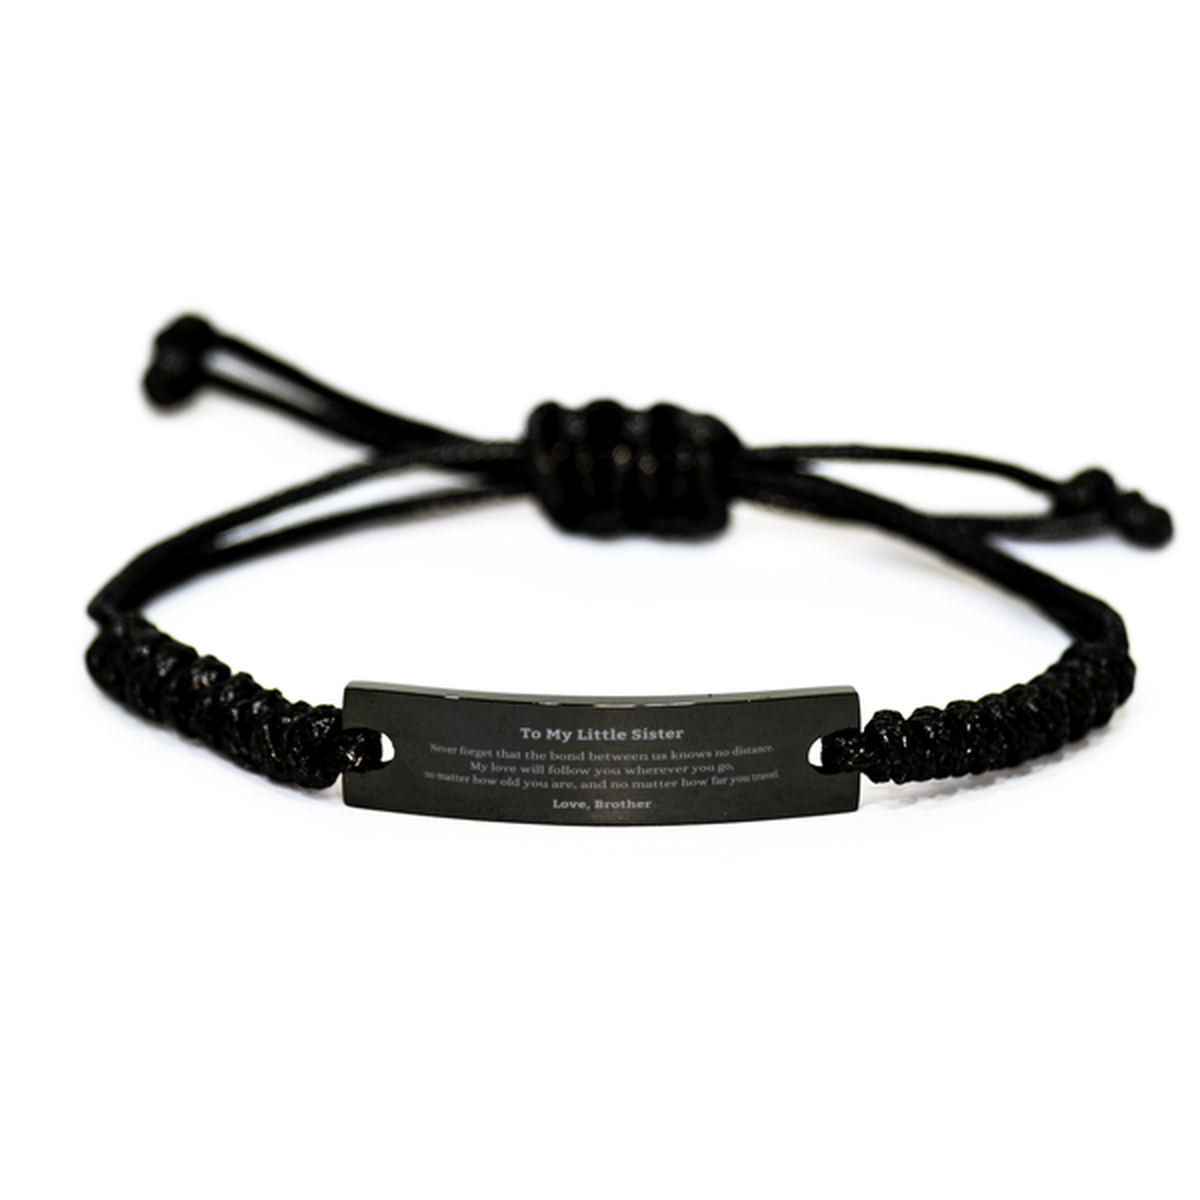 Little Sister Birthday Gifts from Brother, Adjustable Black Rope Bracelet for Little Sister Christmas Graduation Unique Gifts Little Sister Never forget that the bond between us knows no distance. Love, Brother